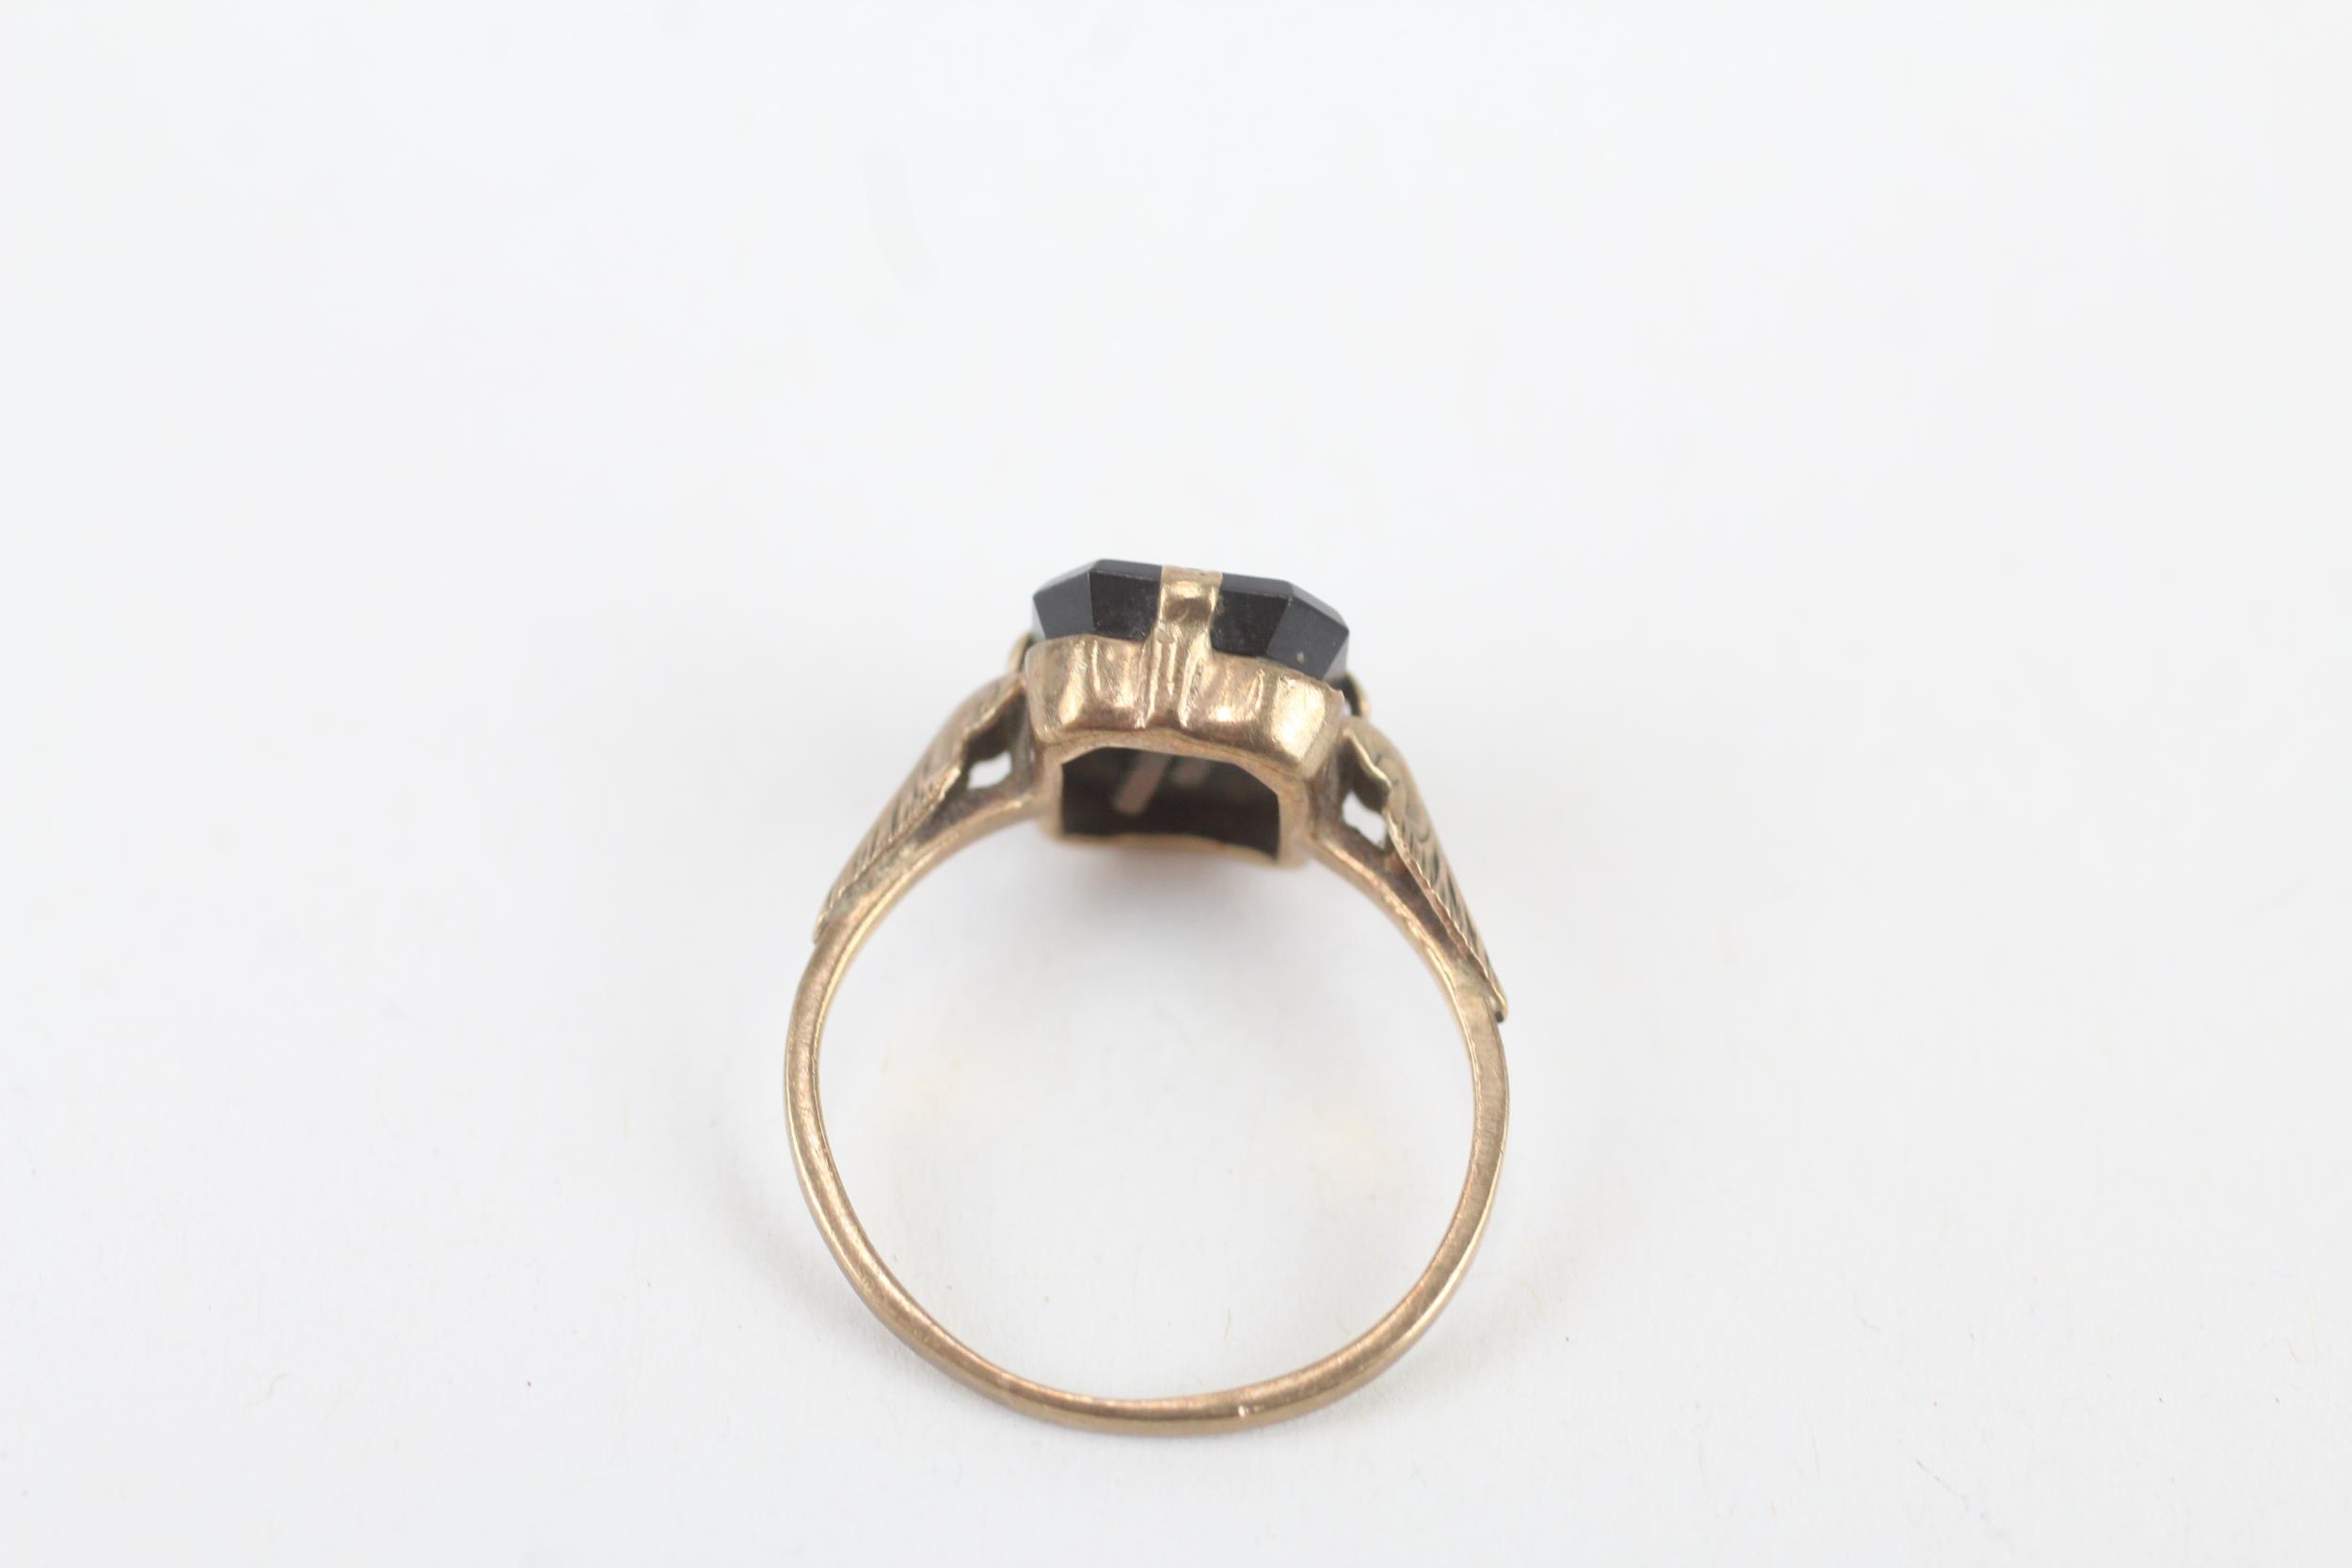 9ct gold antique onyx initial 'G' signet ring - MISHAPEN - AS SEEN Size J 1.6 g - Image 4 of 4